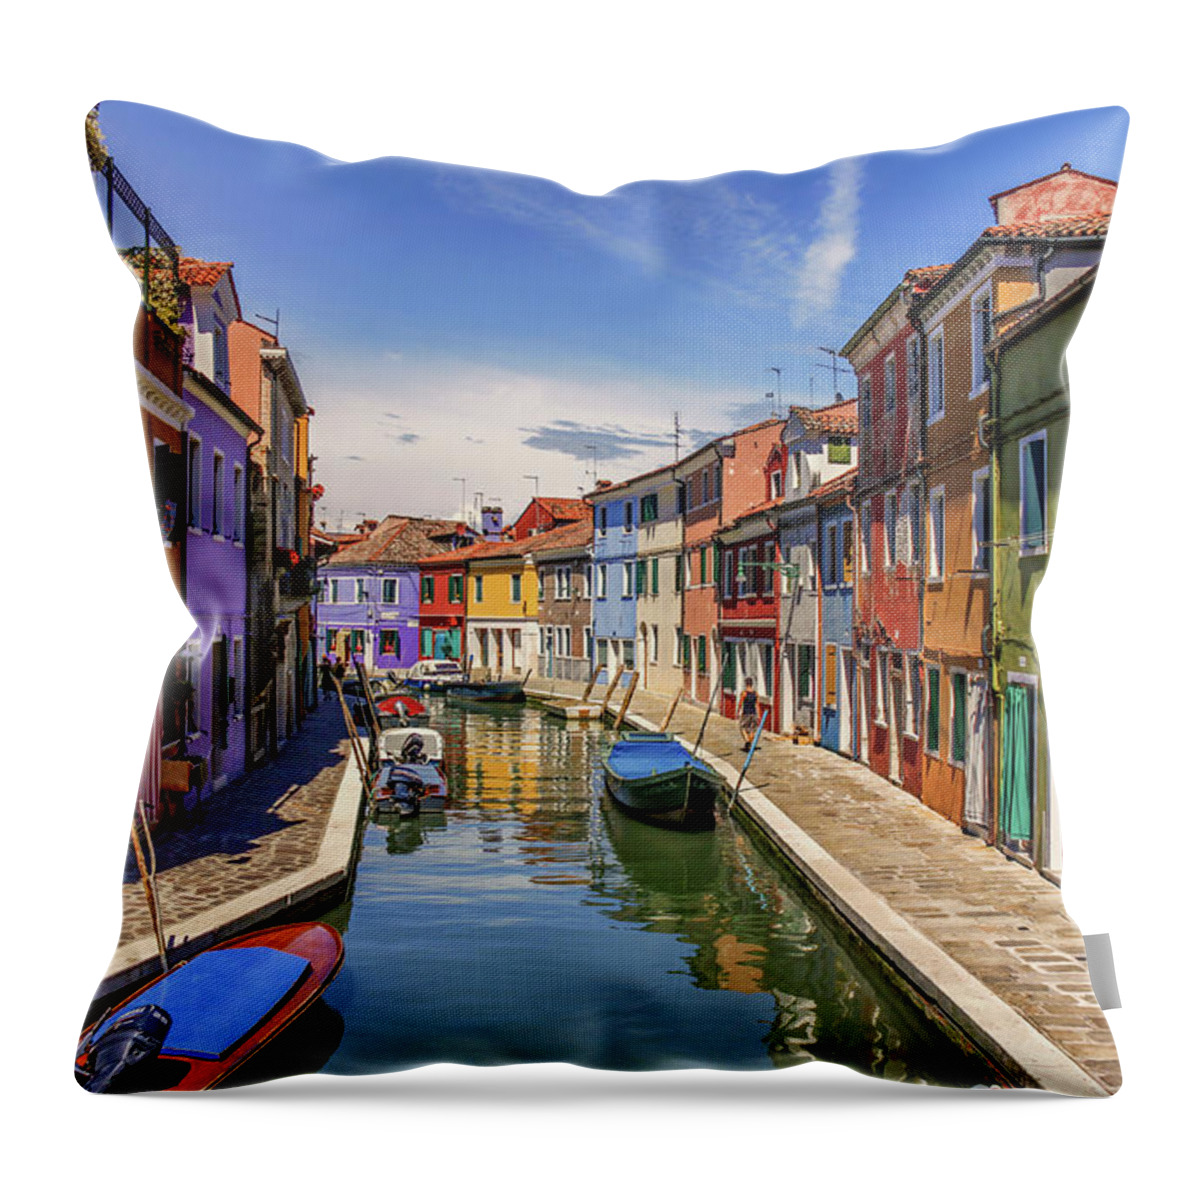 Burano Throw Pillow featuring the photograph Colorful Burano by Karen Sirnick